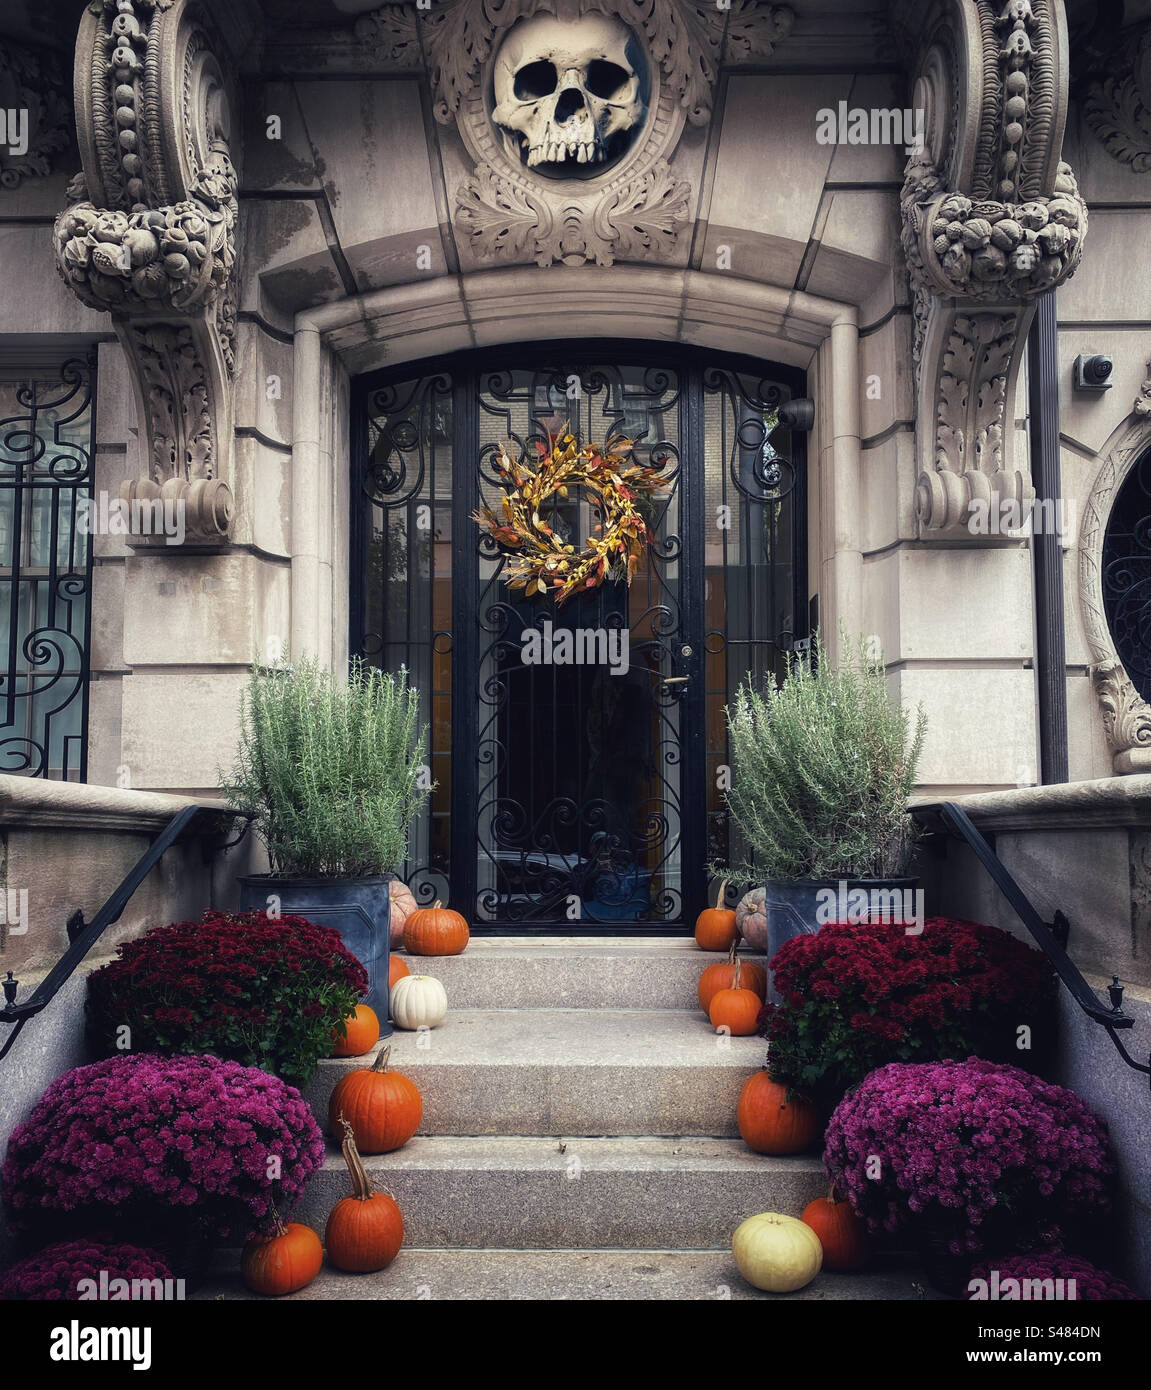 Halloween decorations at the entrance to a New York townhouse Stock Photo